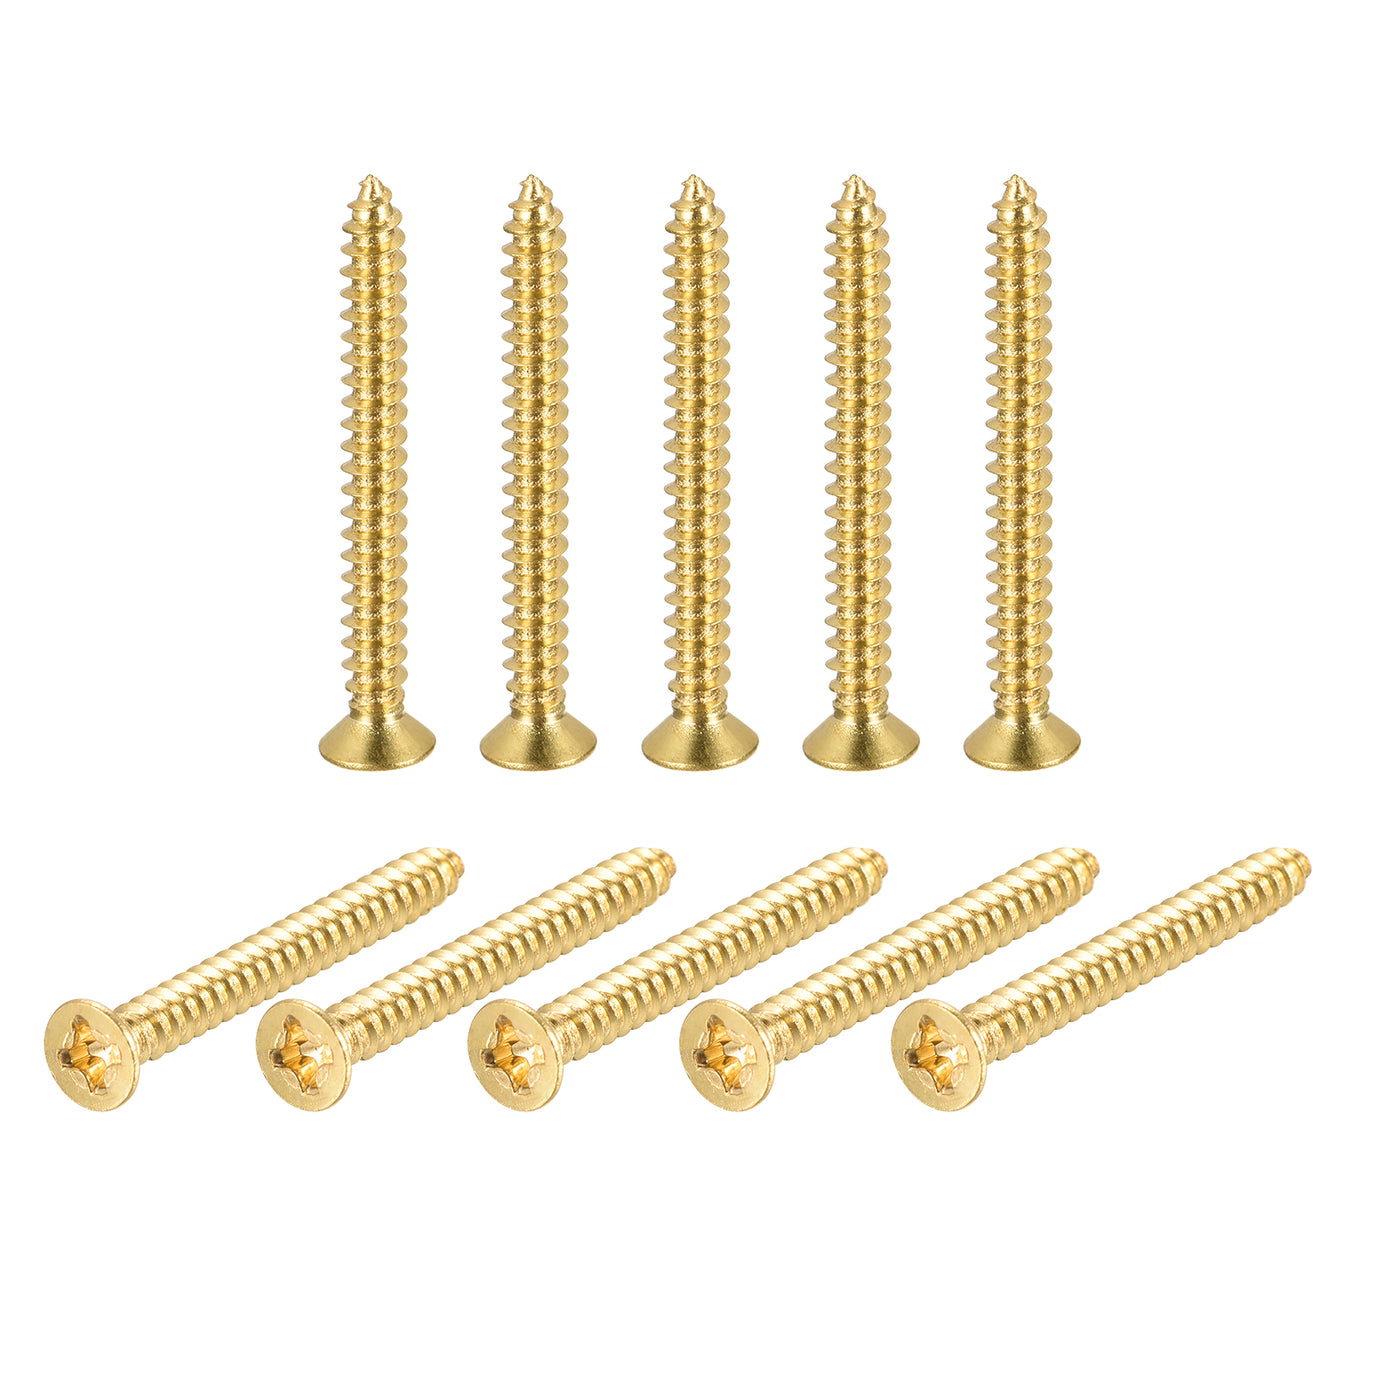 uxcell Uxcell Brass Wood Screws, M3.5x30mm Phillips Flat Head Self Tapping Connector for Door, Cabinet, Wooden Furniture 15Pcs